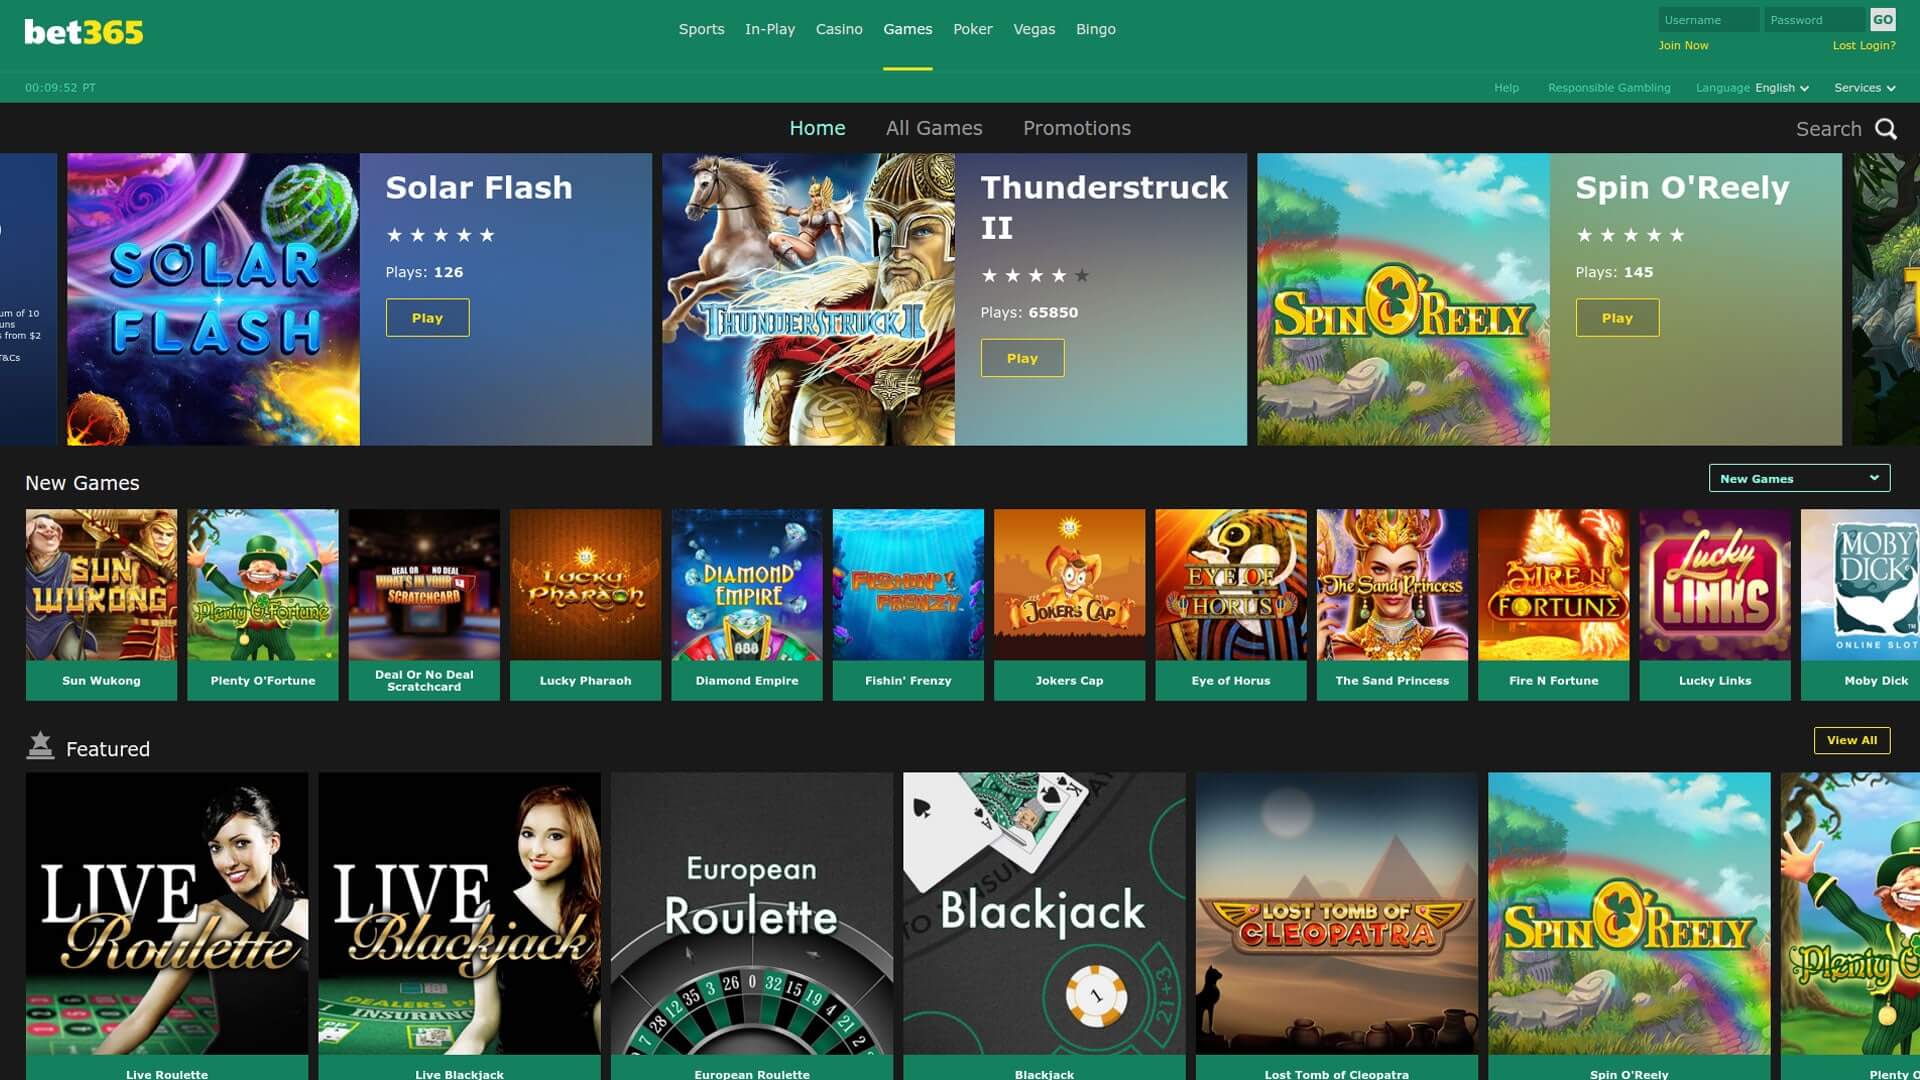 The image shows the game lobby for Bet365 Casino online casino.